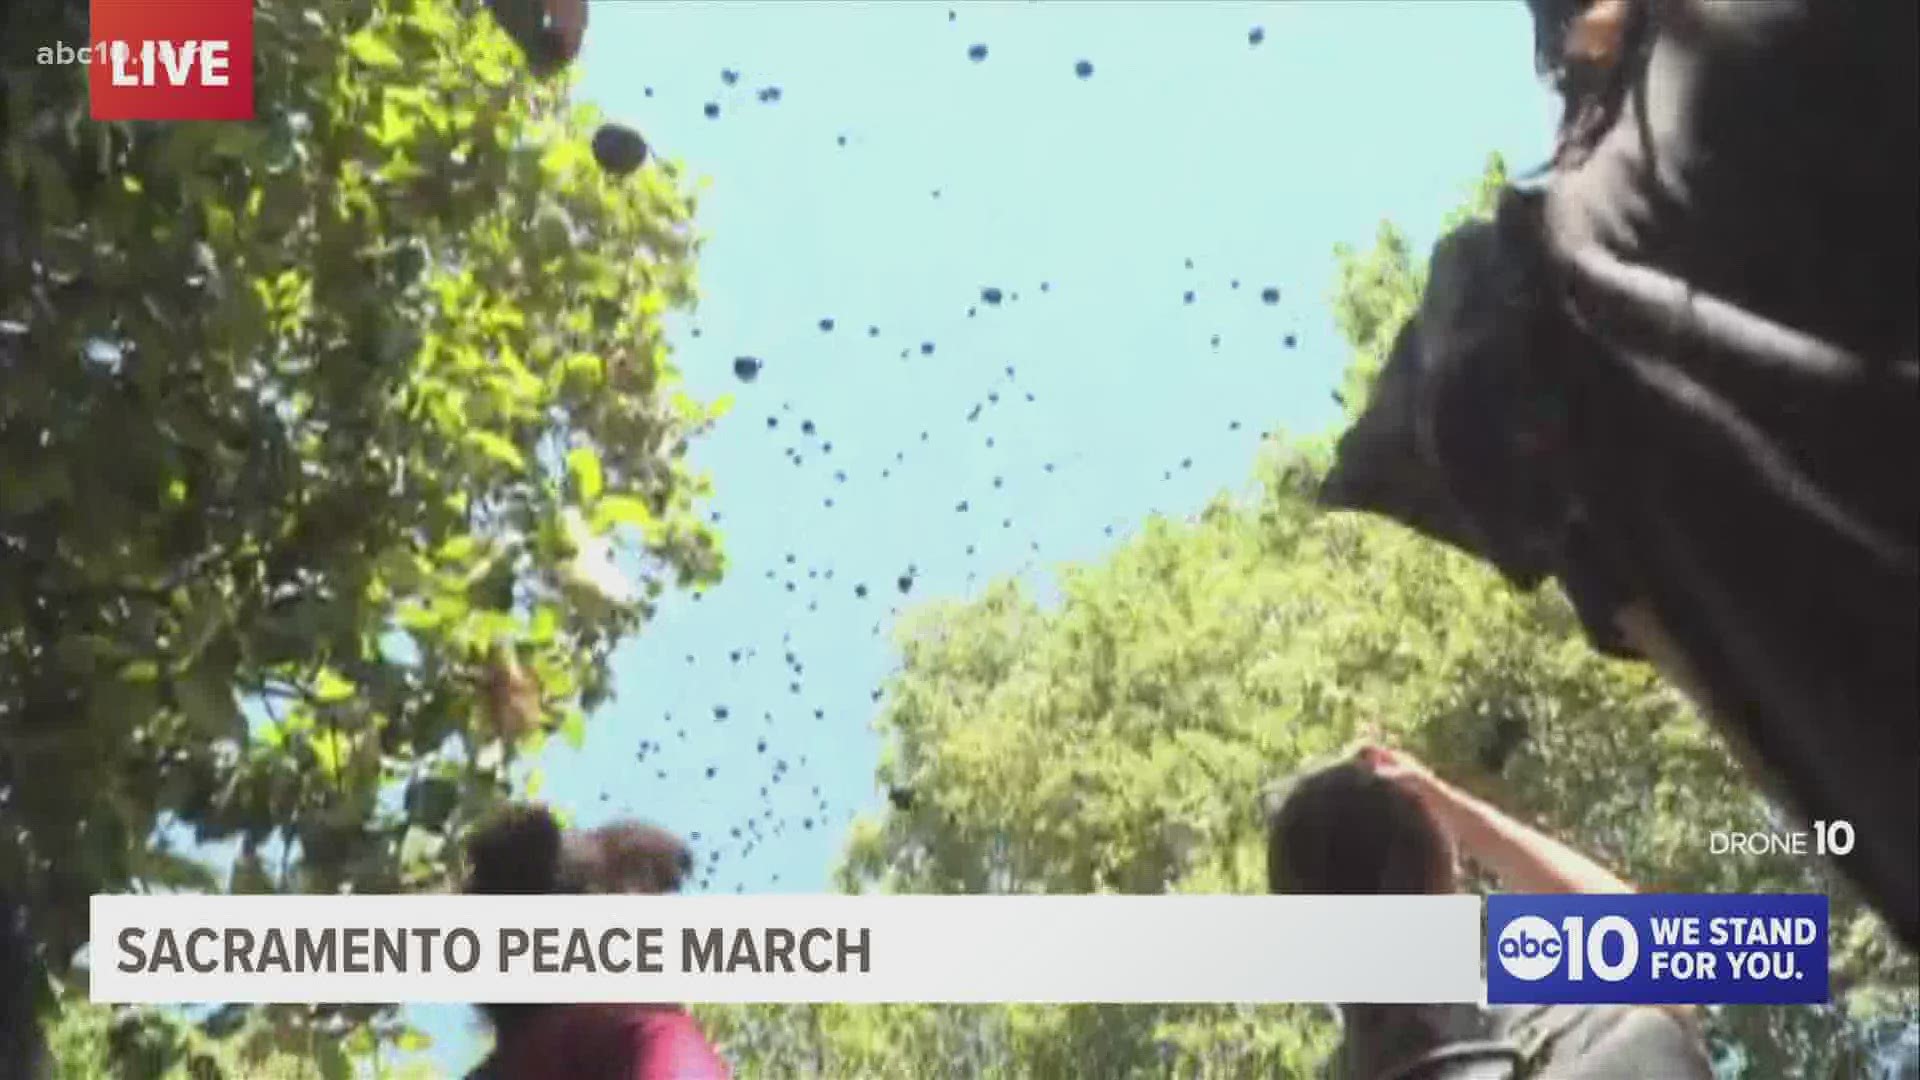 Protesters at the Sacramento Peace March released 1,500 black balloons into the sky to signify the lives lost to police violence.